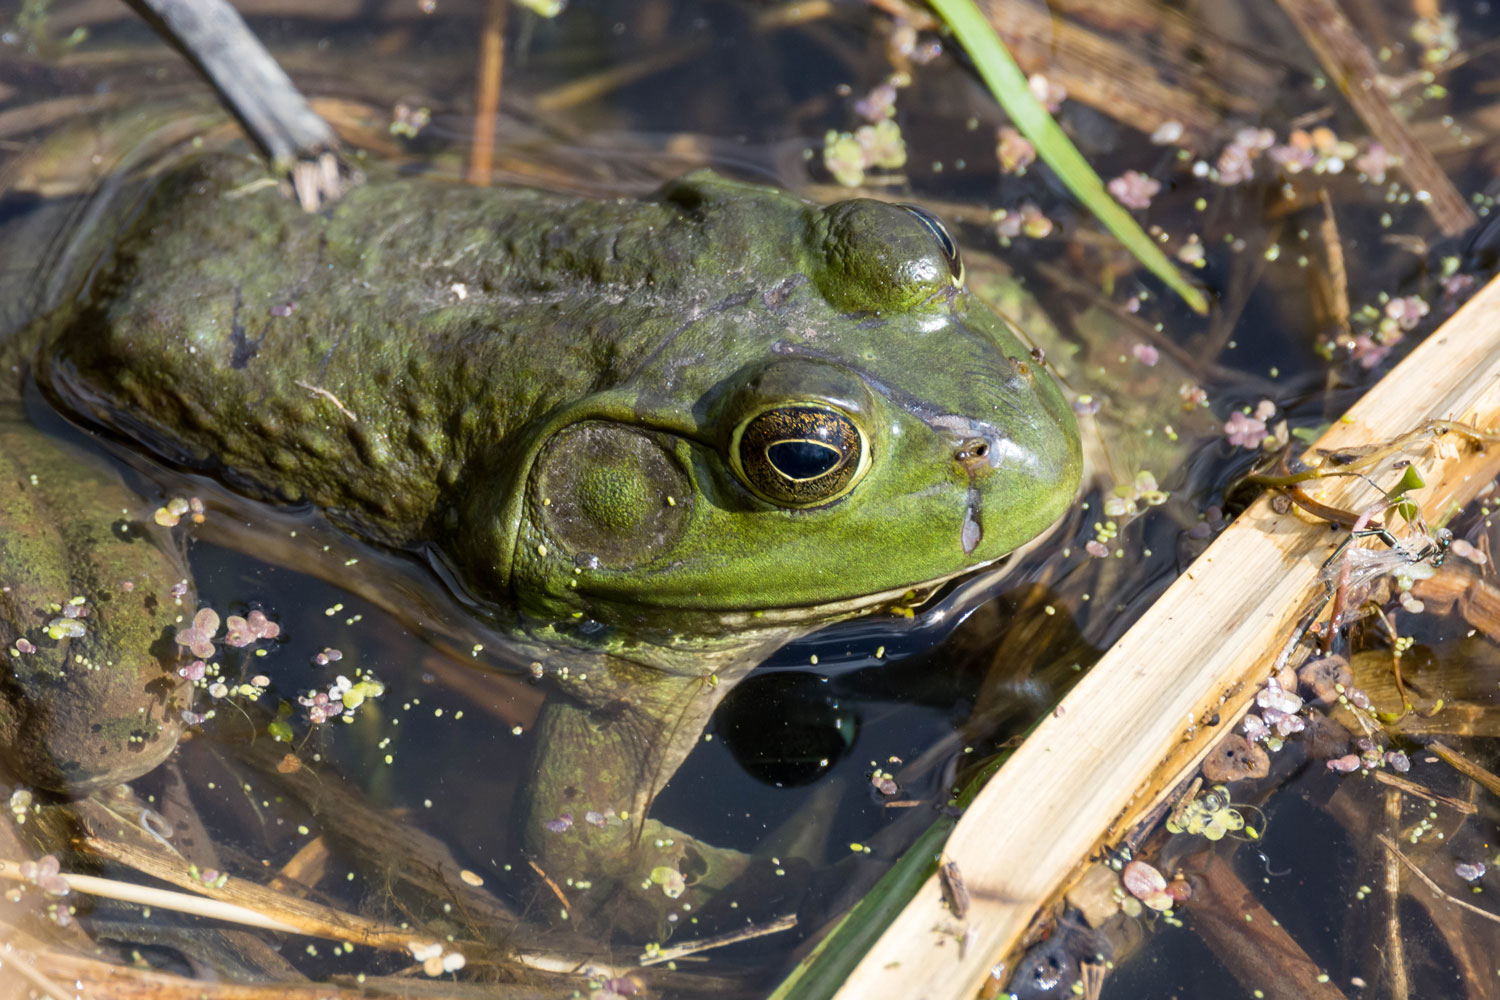 A bullfrog in the water